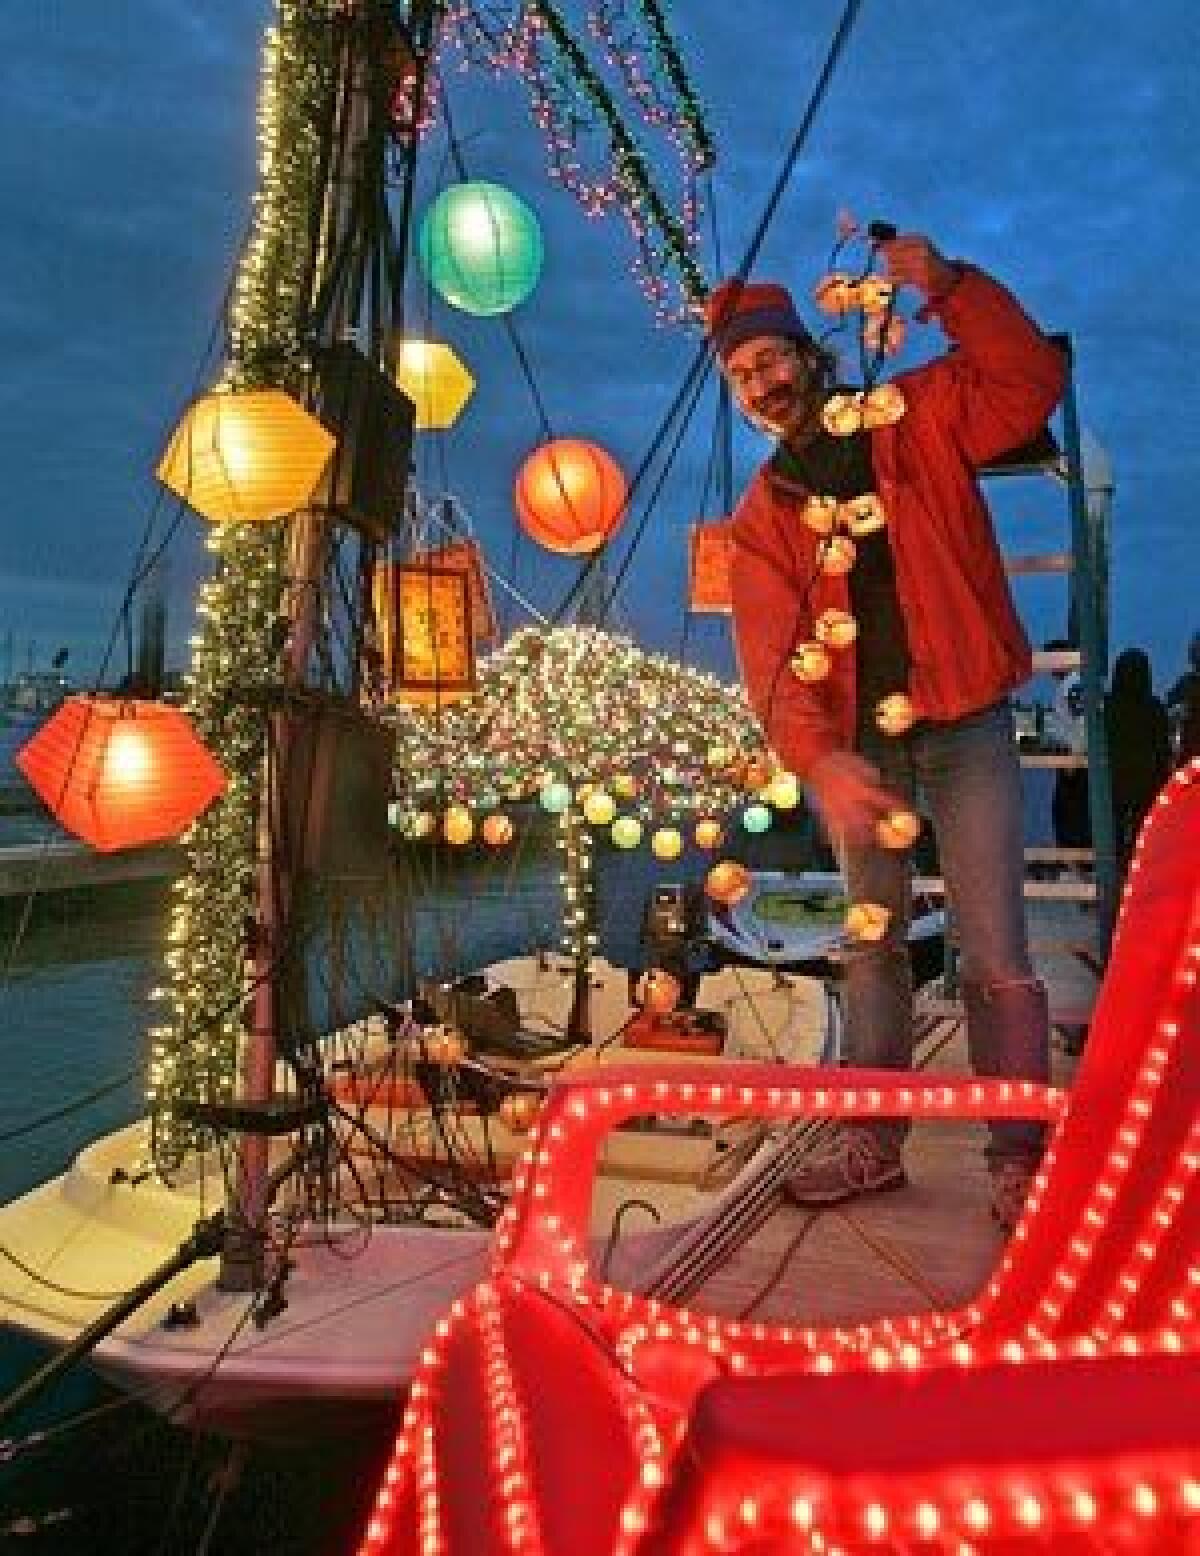 Skipper Peter Barbour strings lights on his boat in preparation for the Newport Beach Christmas boat parade.